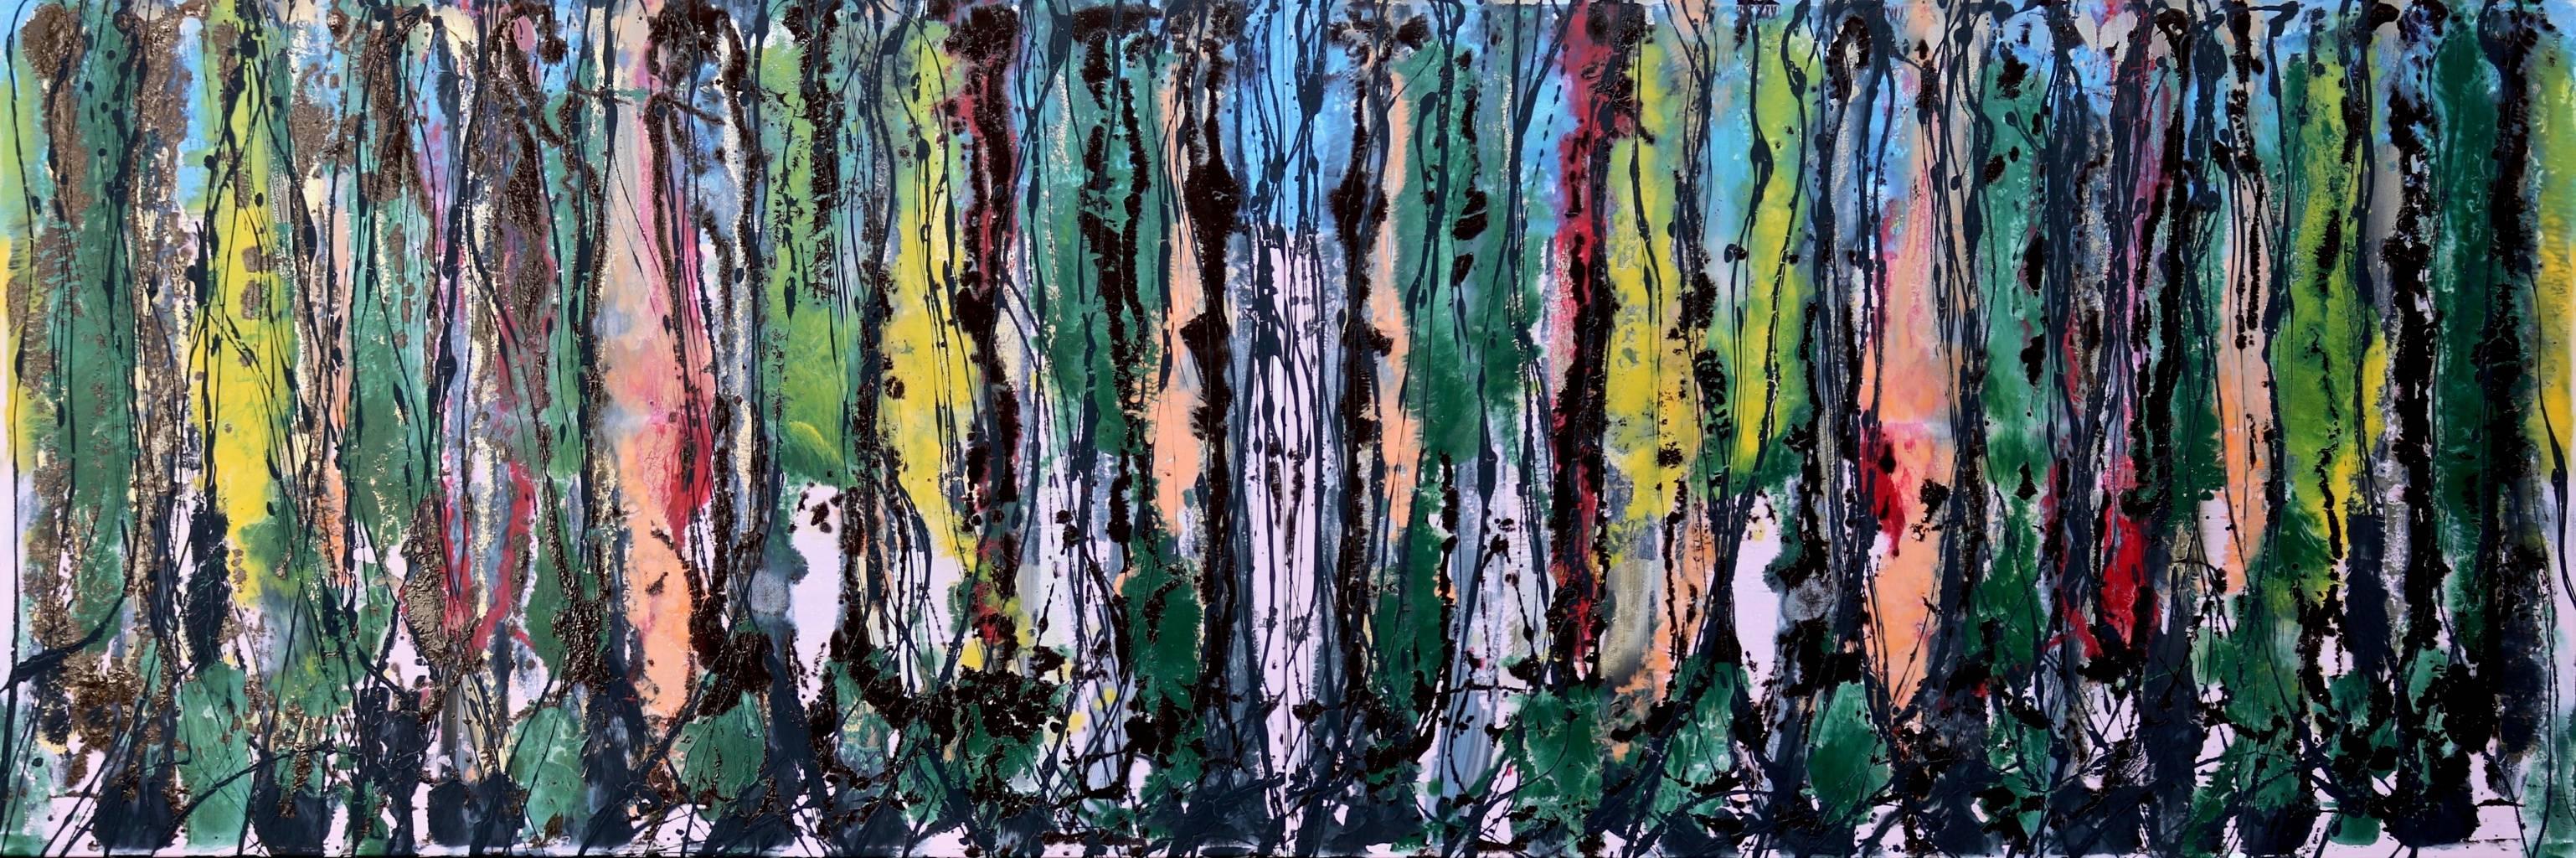 Translated title: "Colored forest"

Acrylic on canvas.
This is a diptych.  